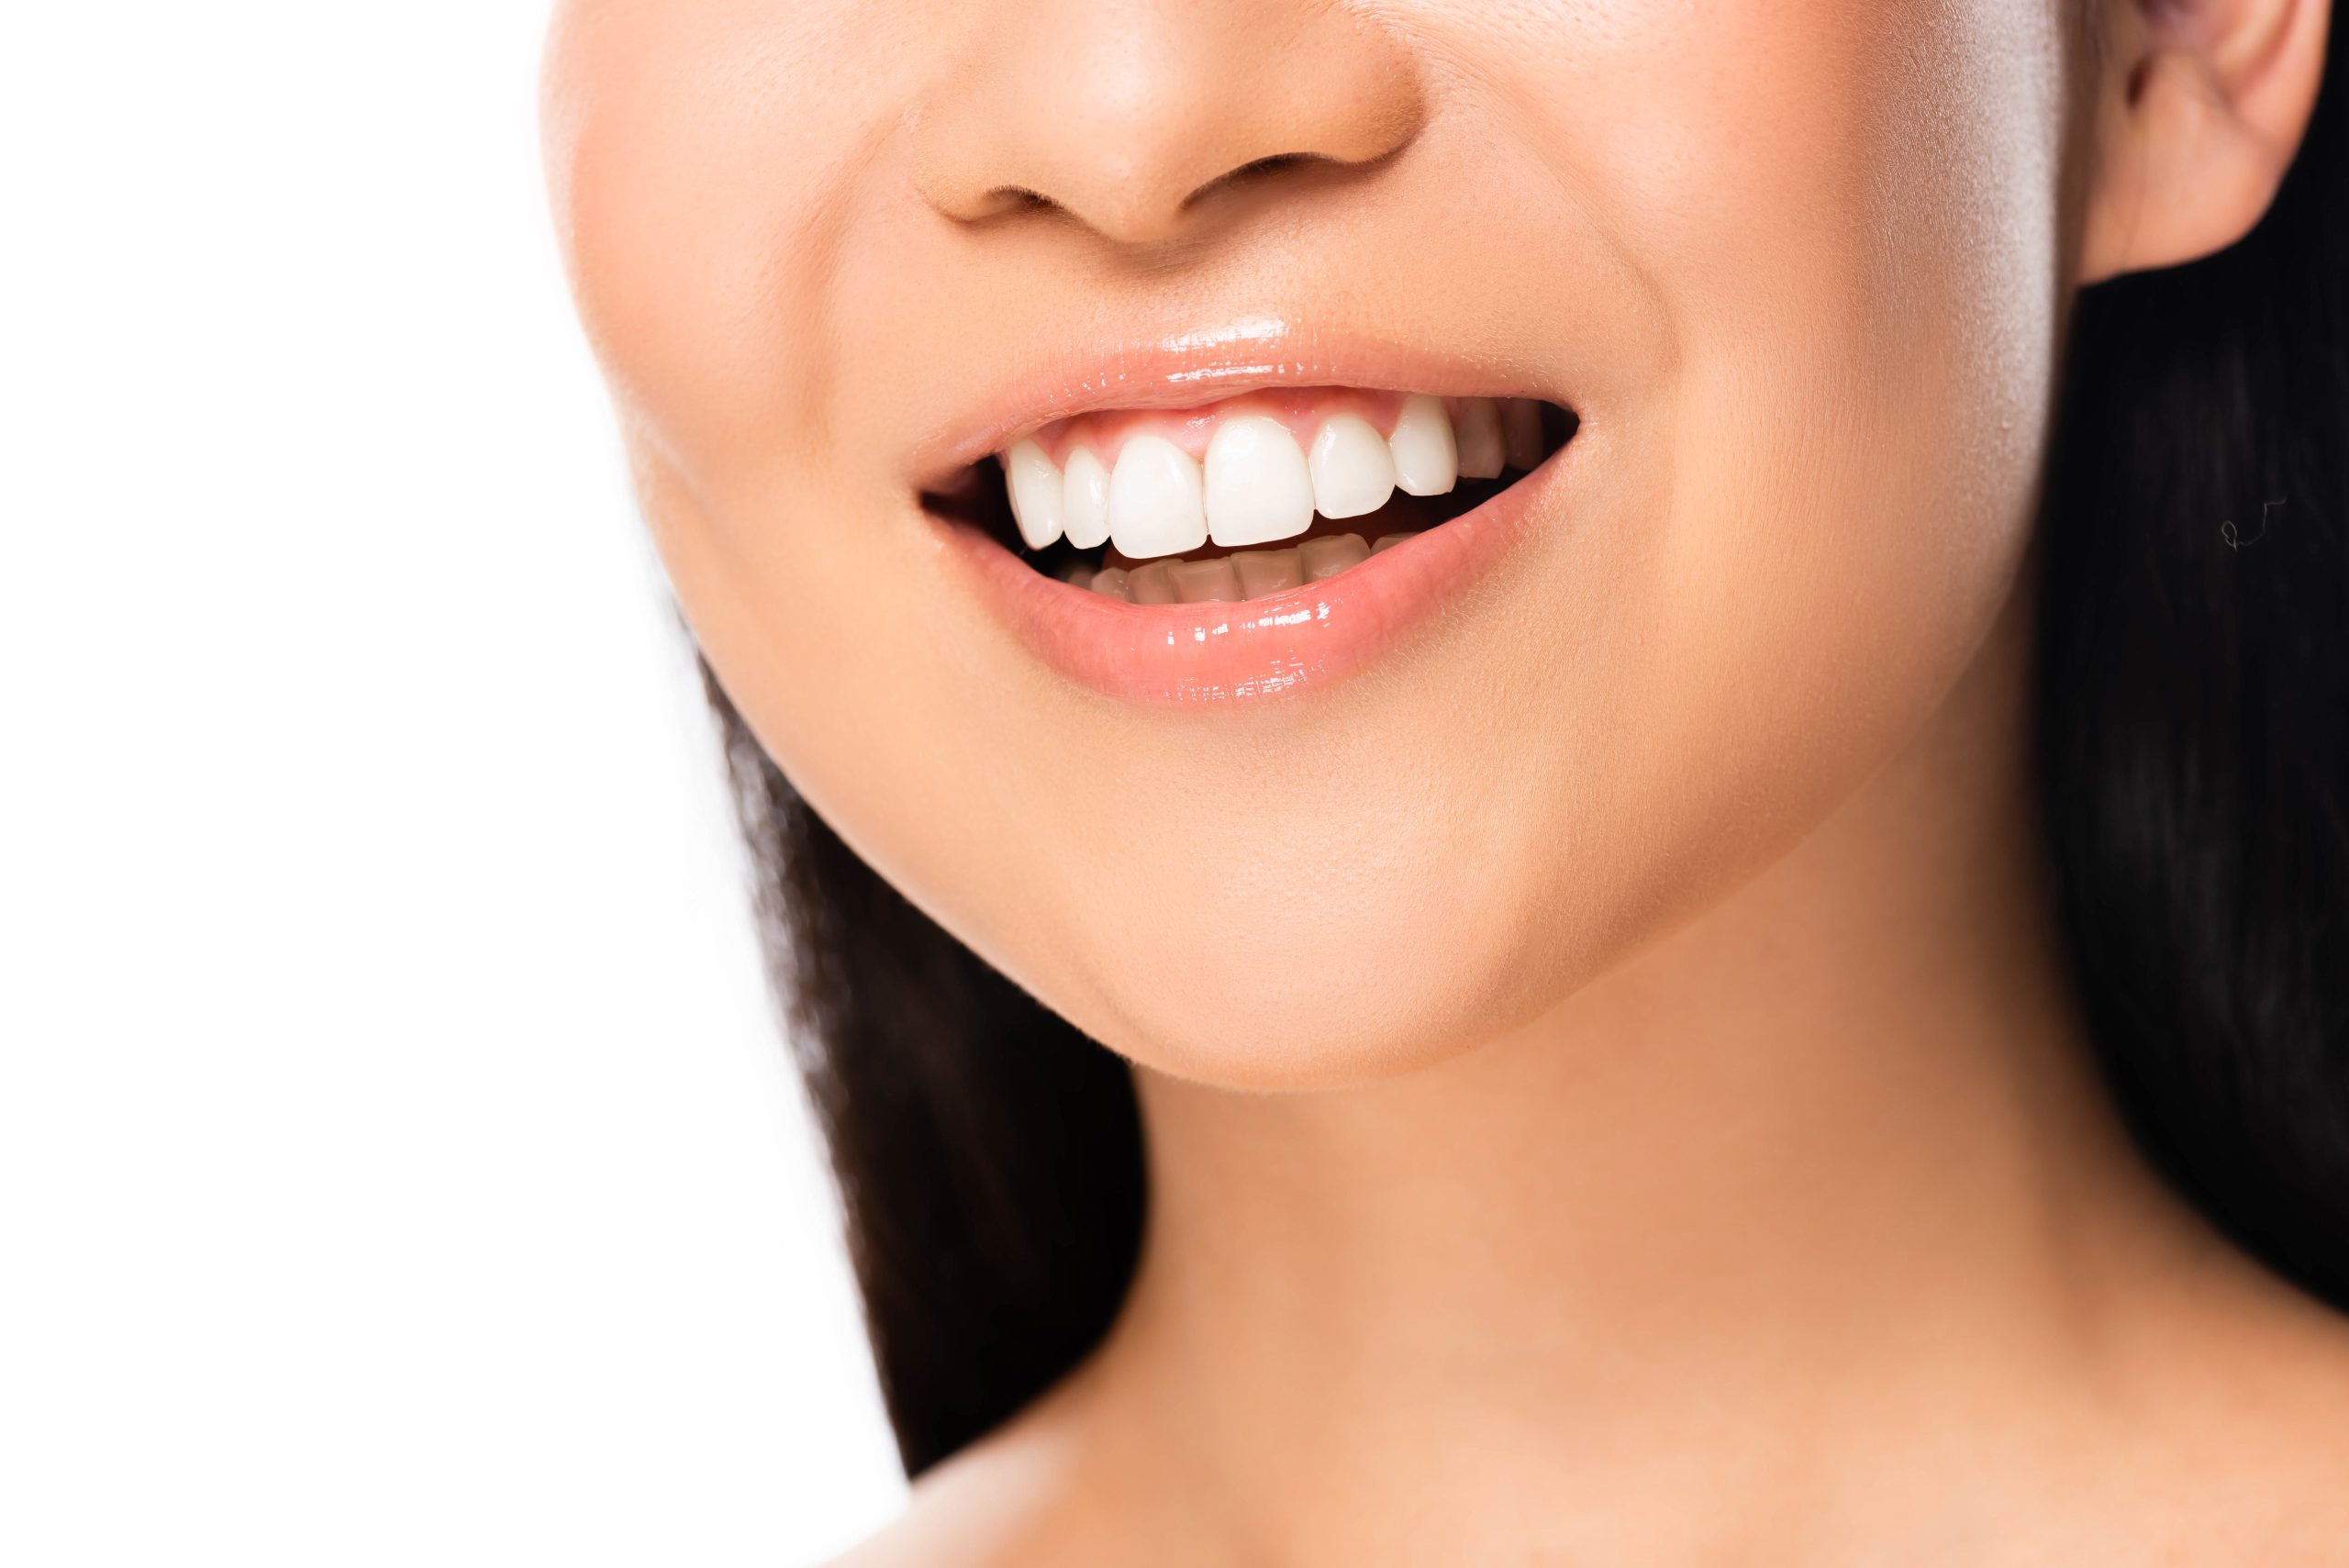 Are veneers permanent or removable